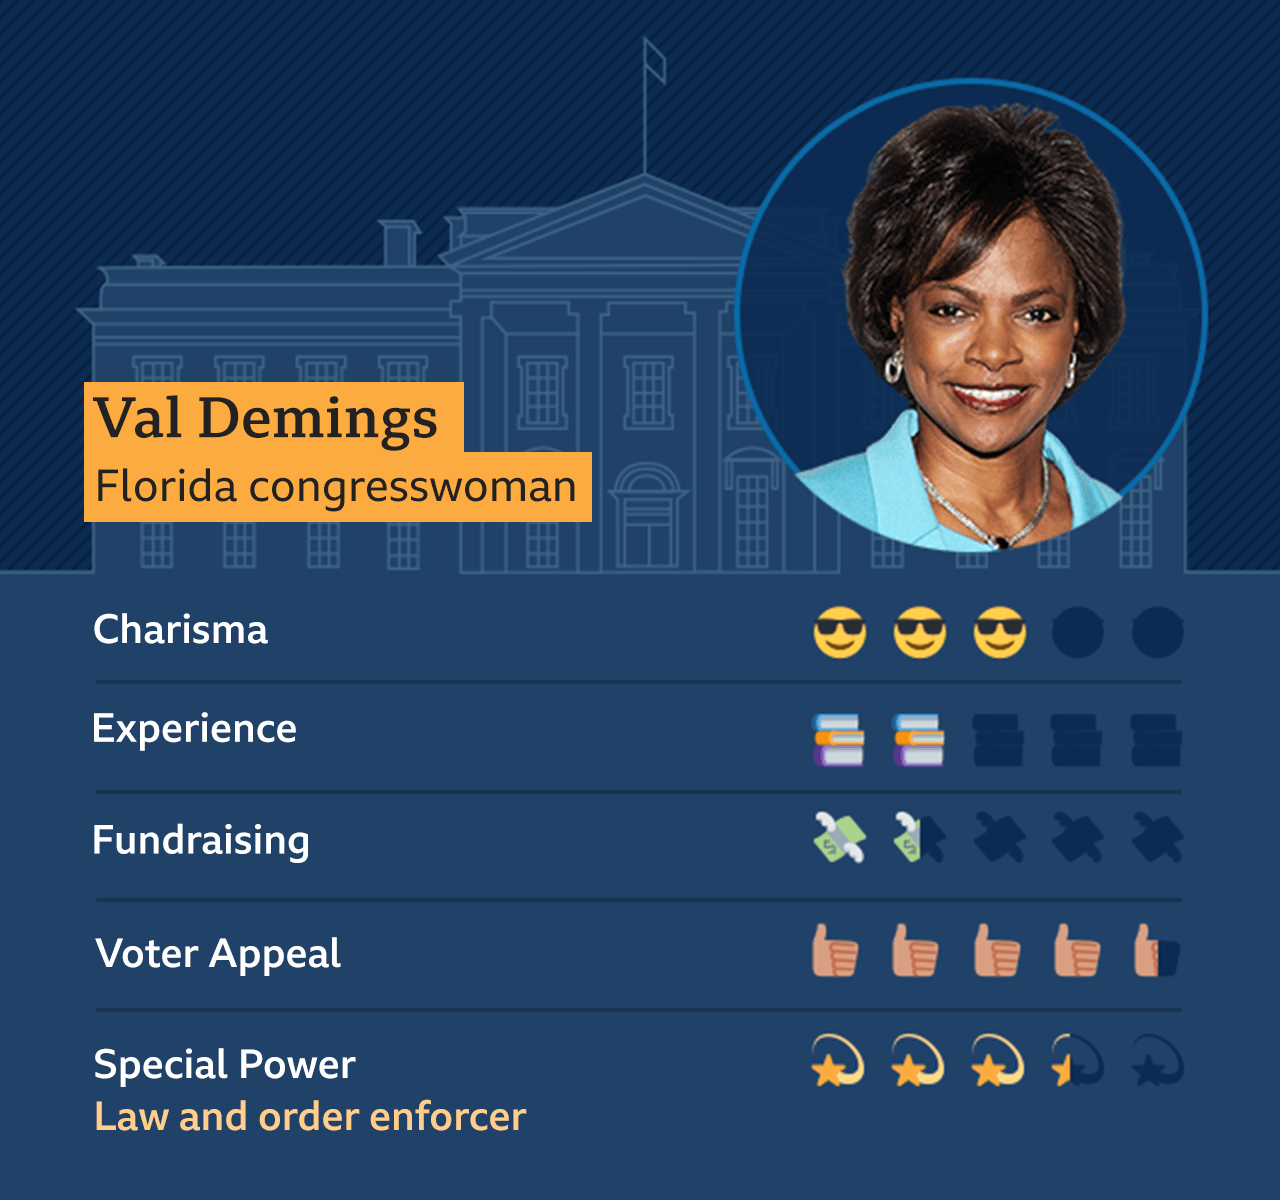 Graphic of Val Demings, Florida congresswoman: Charisma - 3, Experience - 2, Fundraising - 1.5, Voter appeal - 4.5, Special Power - Law and order enforcer - 3.5